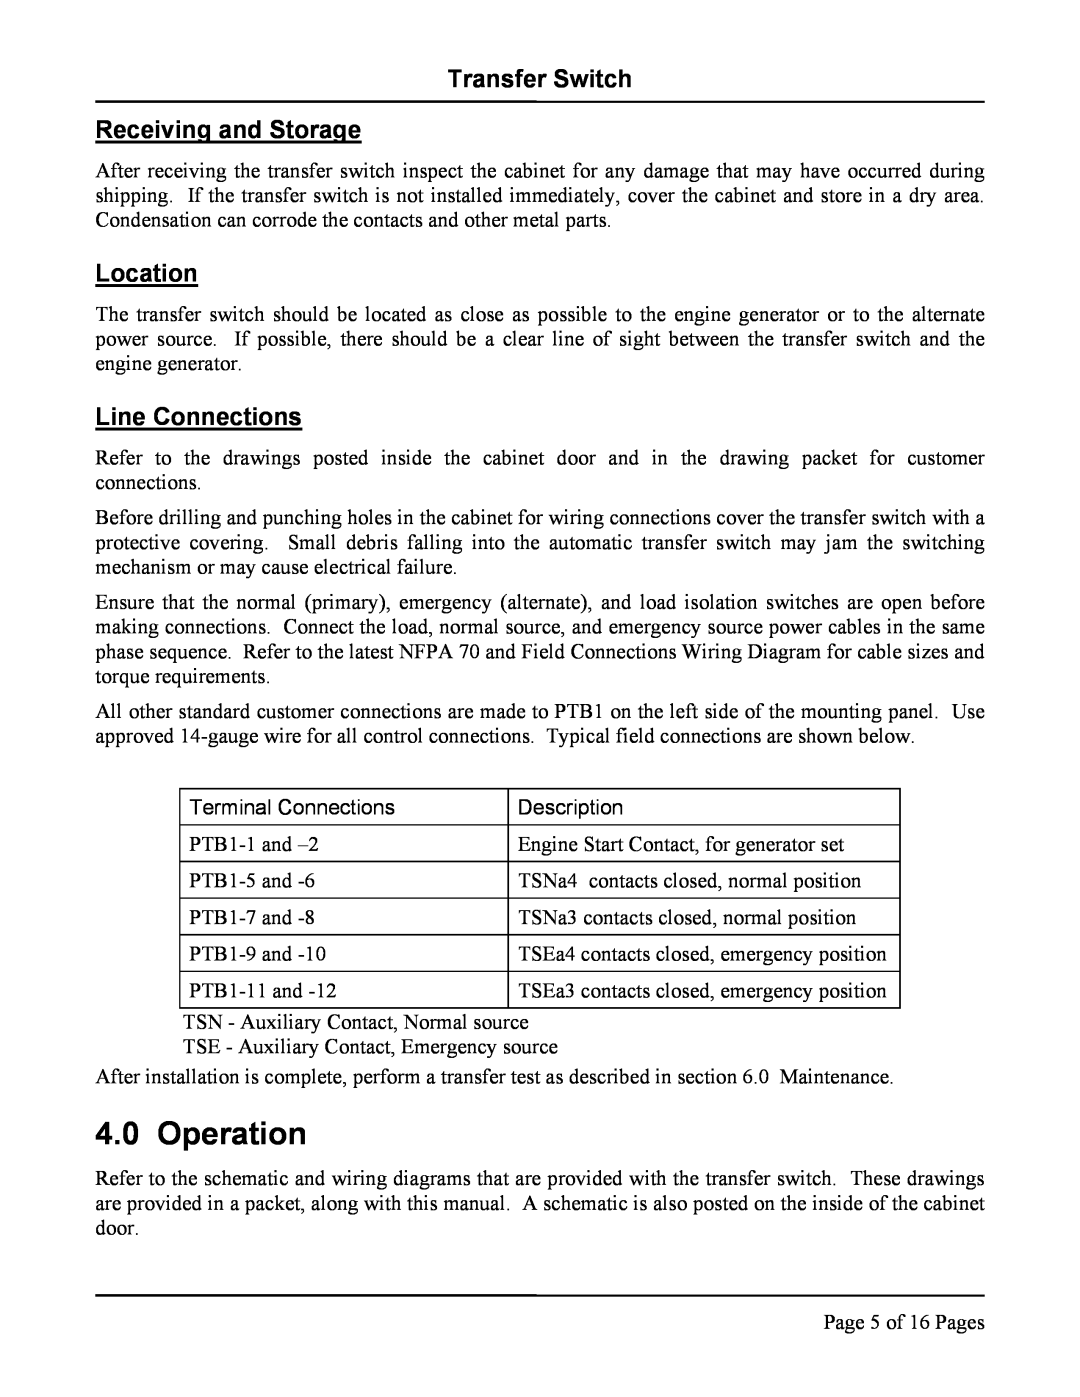 Hubbell LX-450, LX-440 instruction manual Operation, Transfer Switch Receiving and Storage, Location, Line Connections 